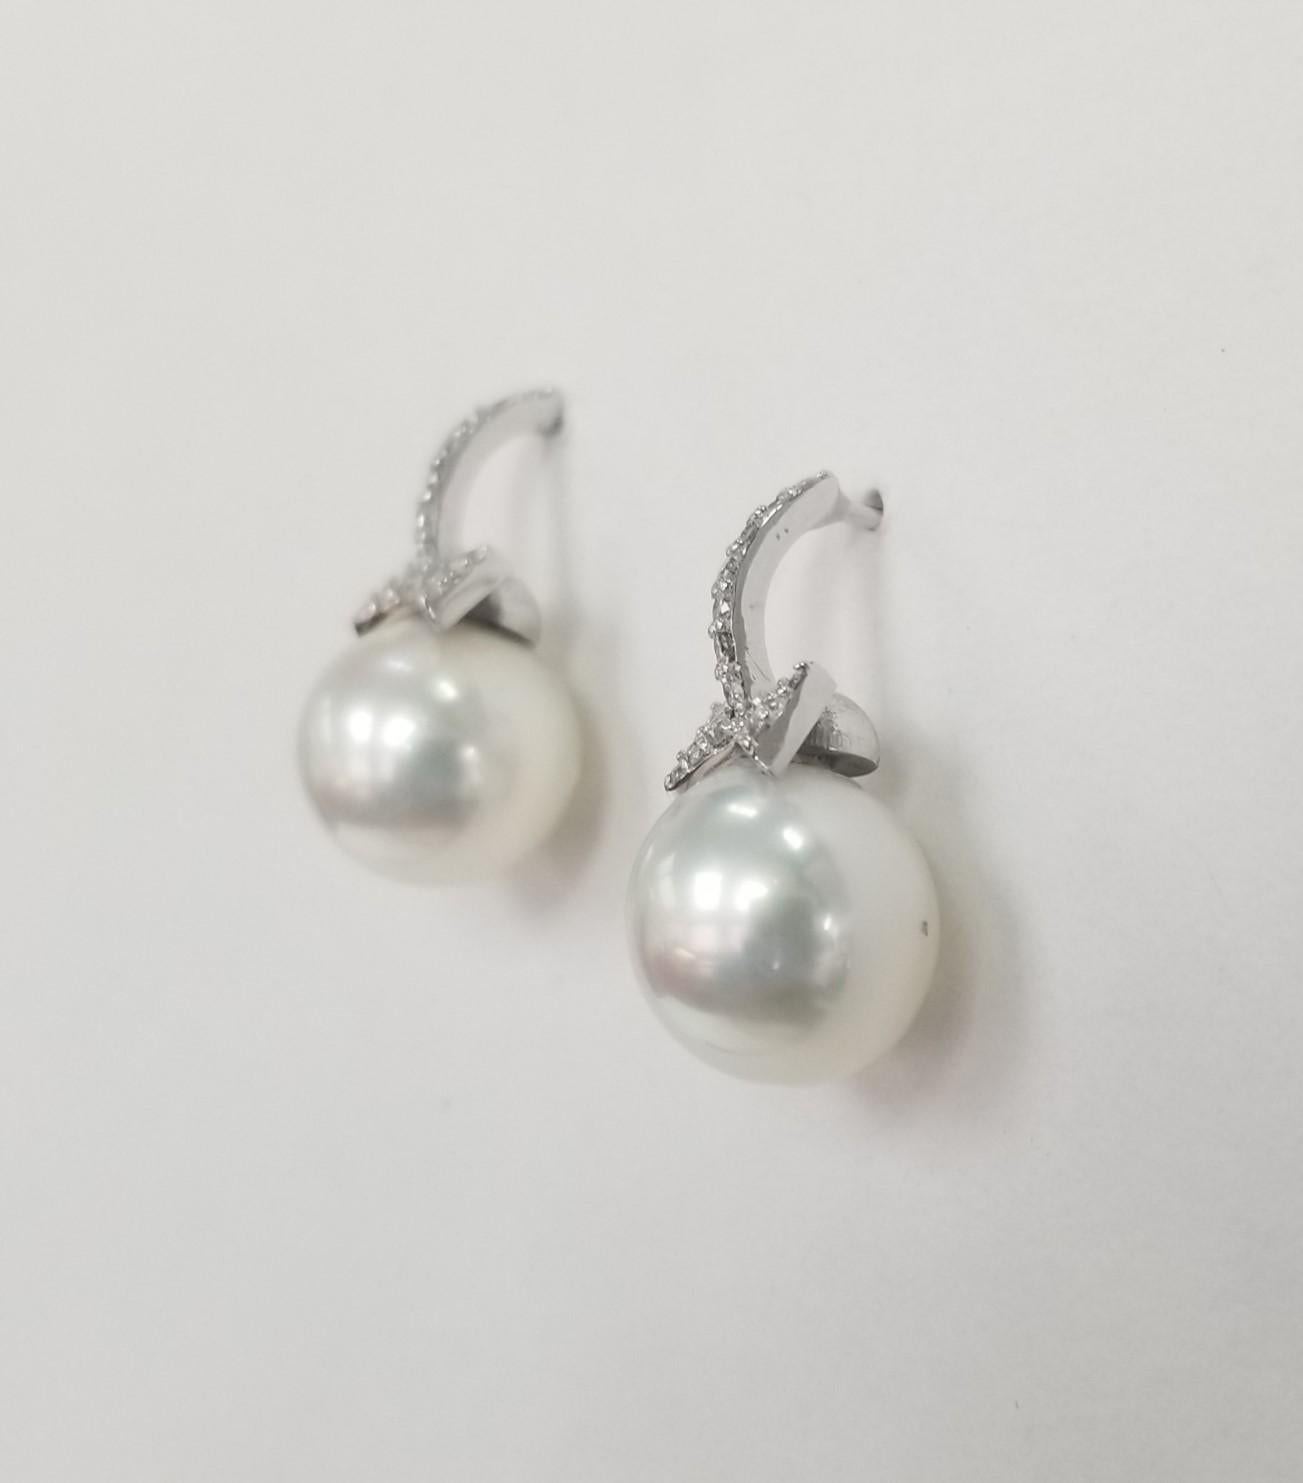 Item specifics
Pearl: 2 South Sea Pearls 12mm
Stones: Diamonds 
Color: G VS Clarity
Metal:14k  Gold
Total Carat Weight: .38pts.
Brand:Undisclosed
Type:Earrings
